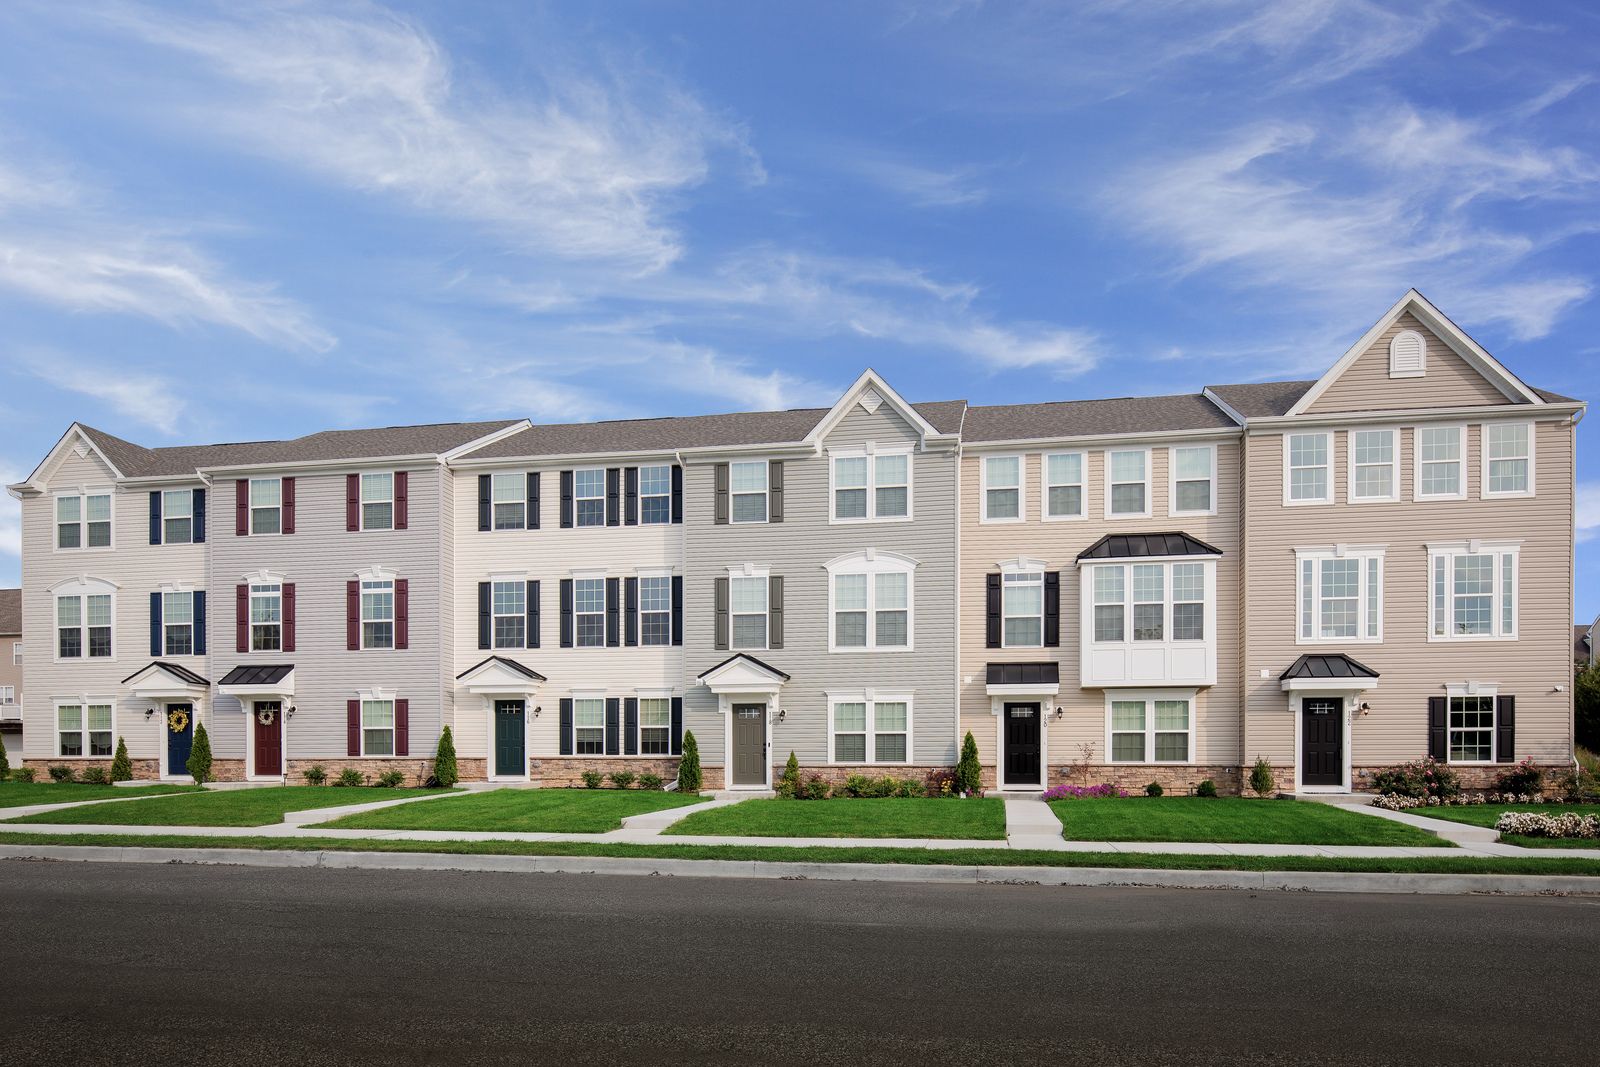 Welcome to Chestnut Hill Preserve Townhomes